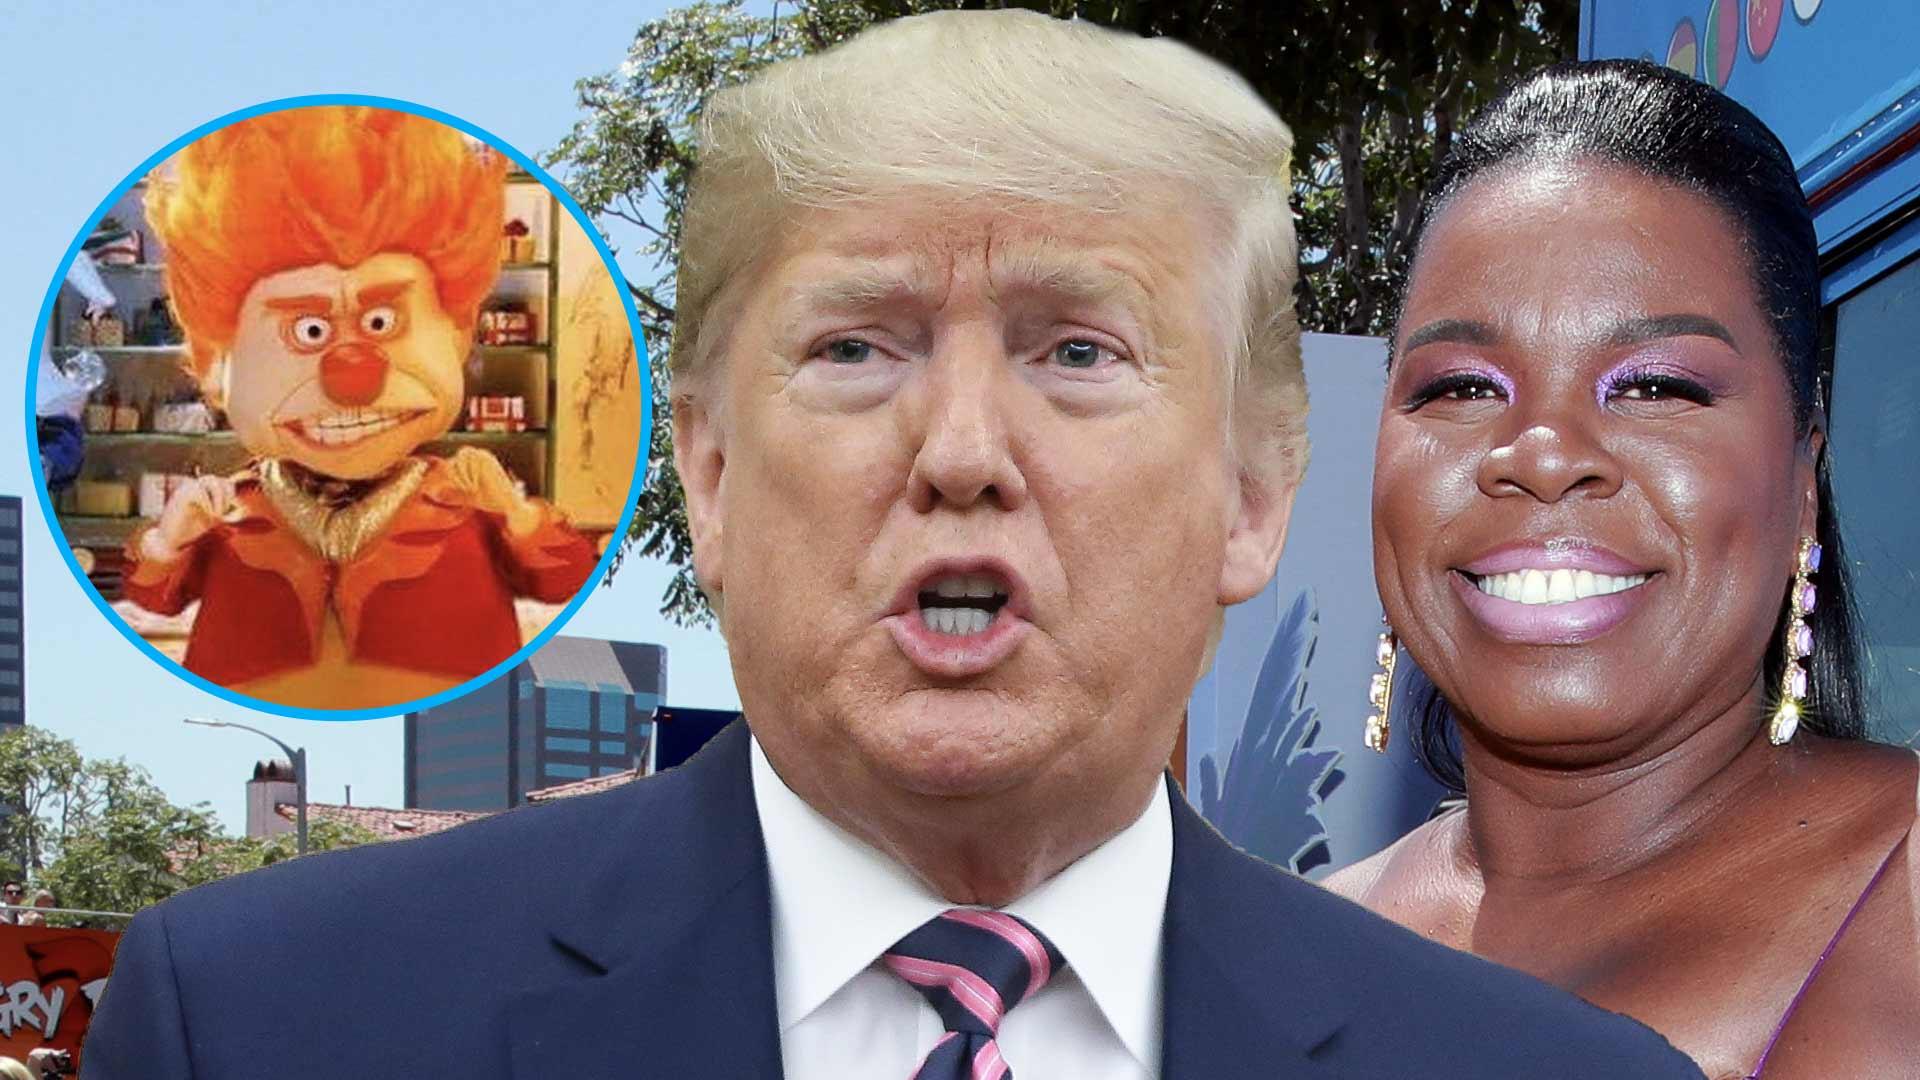 Leslie Jones Compares Trump To Heat Miser From This Classic Christmas Movie